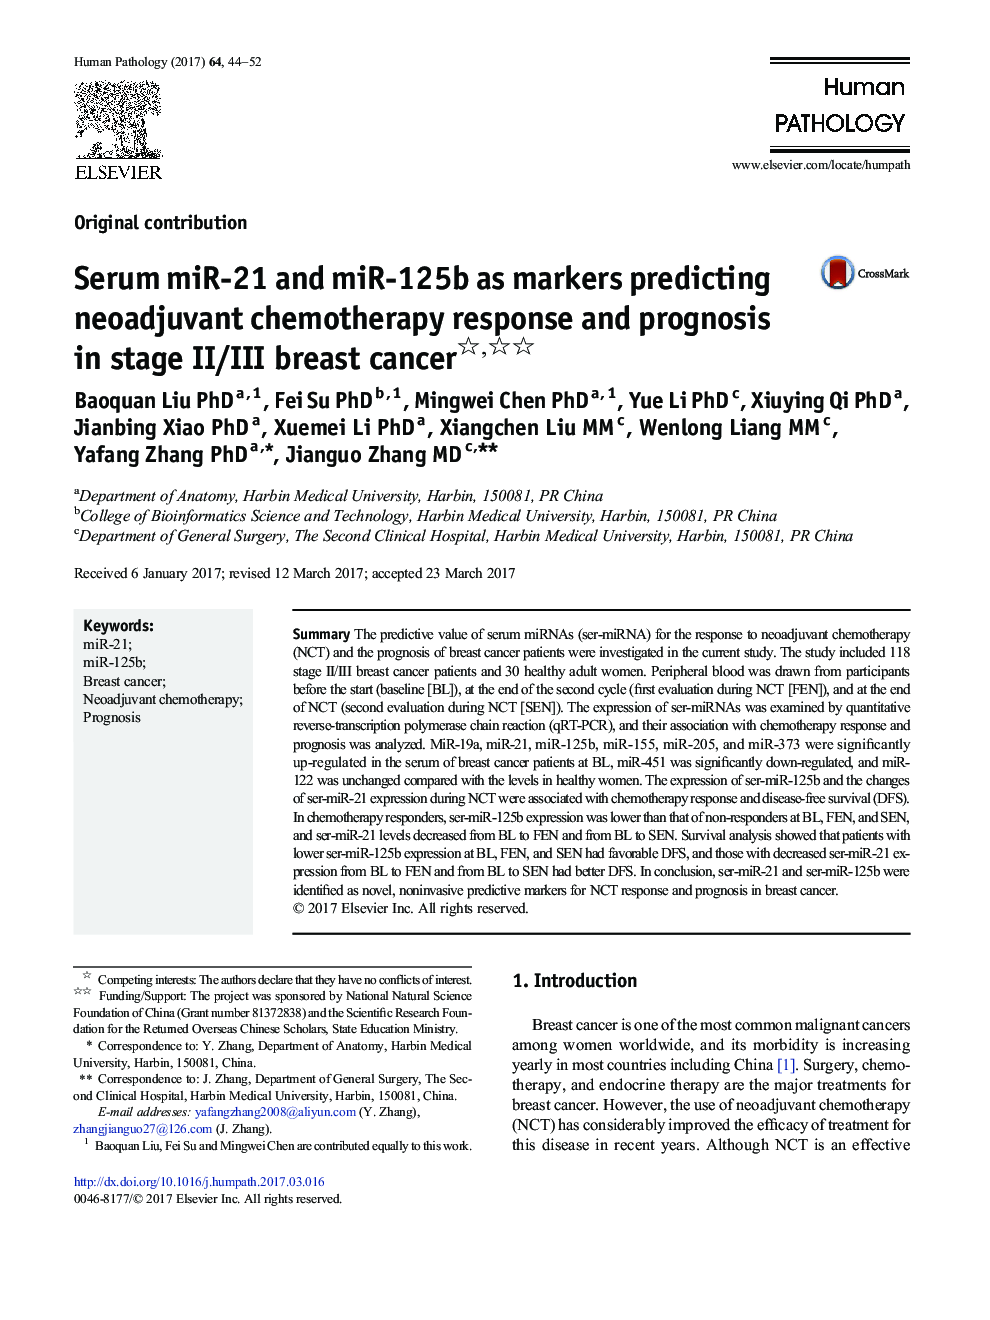 Original contributionSerum miR-21 and miR-125b as markers predicting neoadjuvant chemotherapy response and prognosis in stage II/III breast cancer